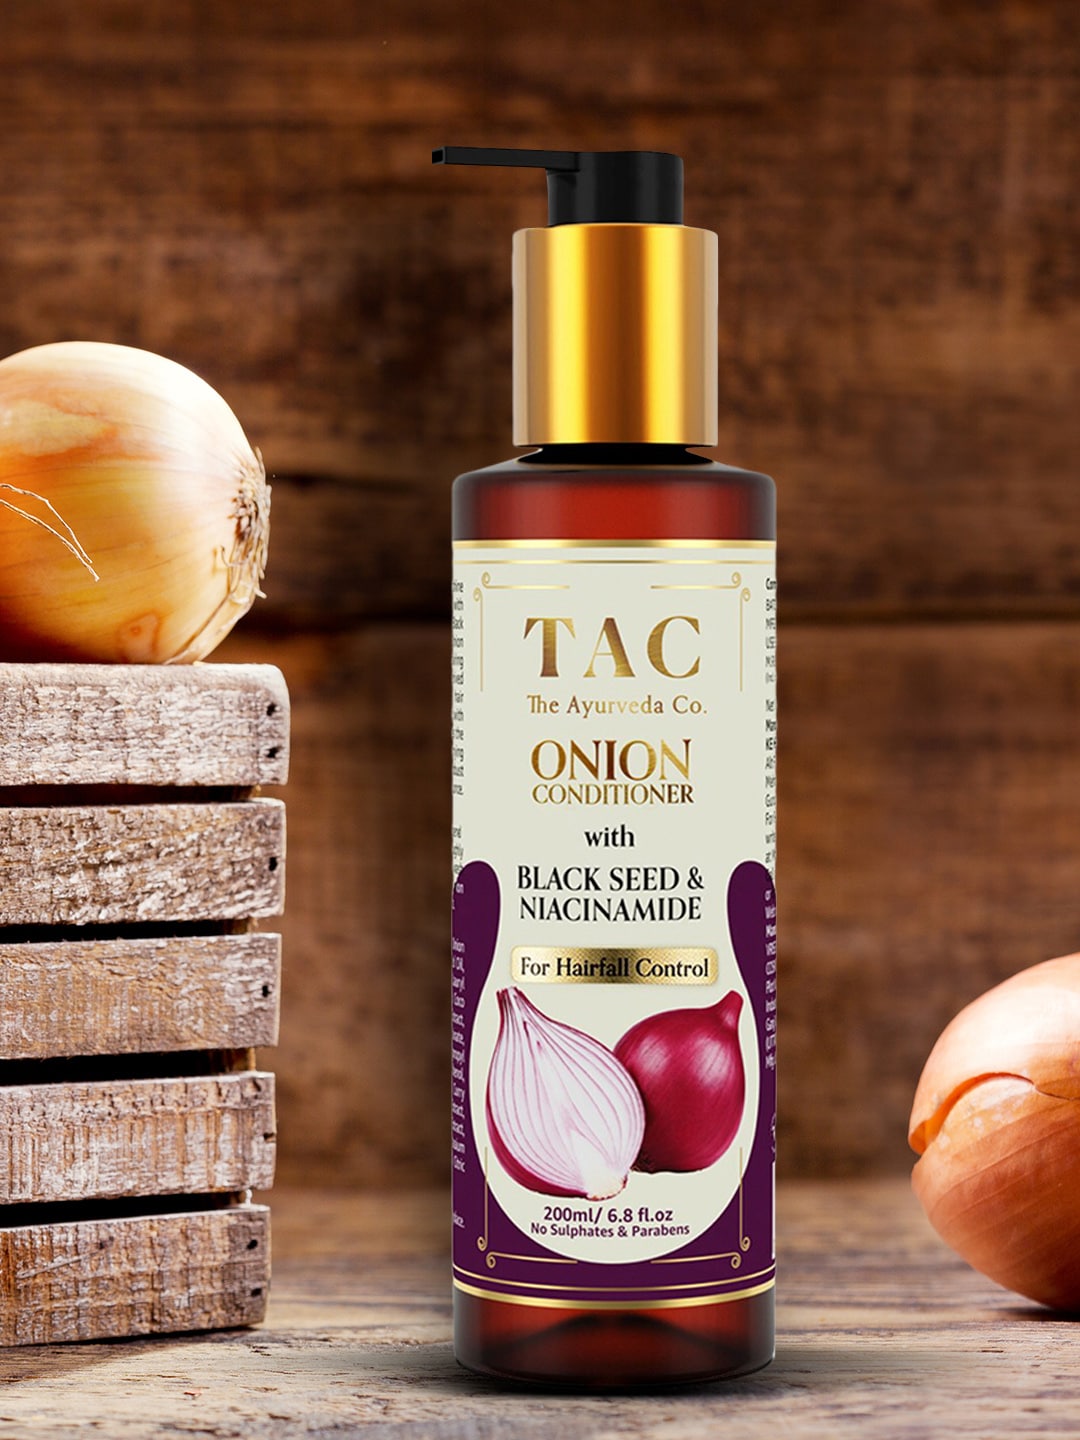 TAC- The Ayurveda Co. Onion with Black Seed & Niacinamide Conditioner 200ml Price in India